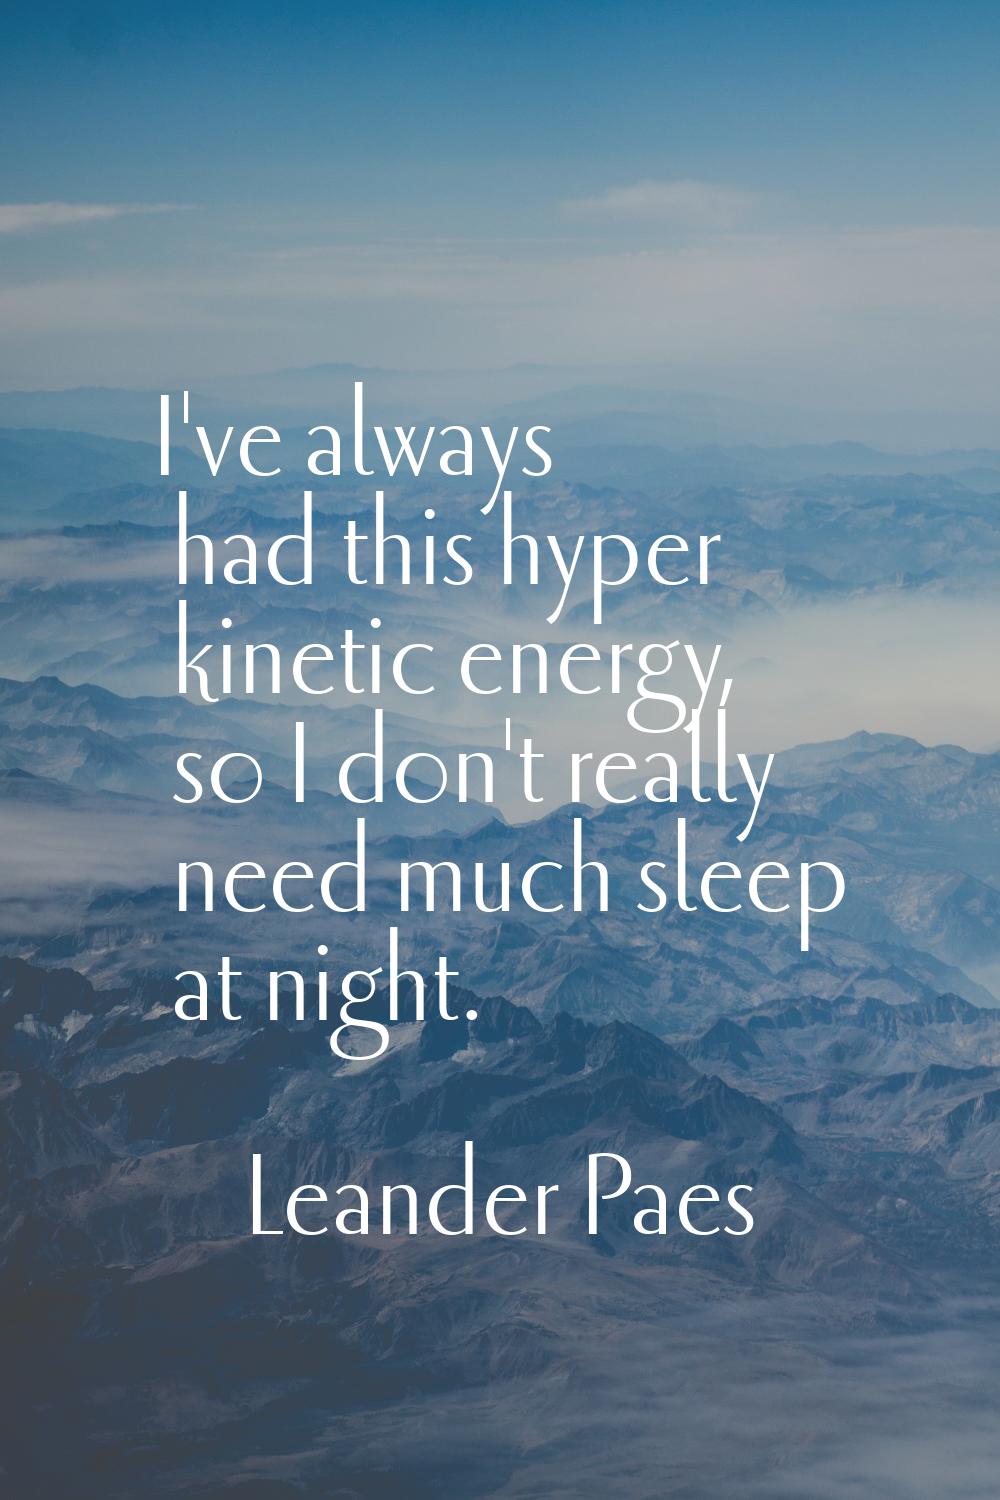 I've always had this hyper kinetic energy, so I don't really need much sleep at night.